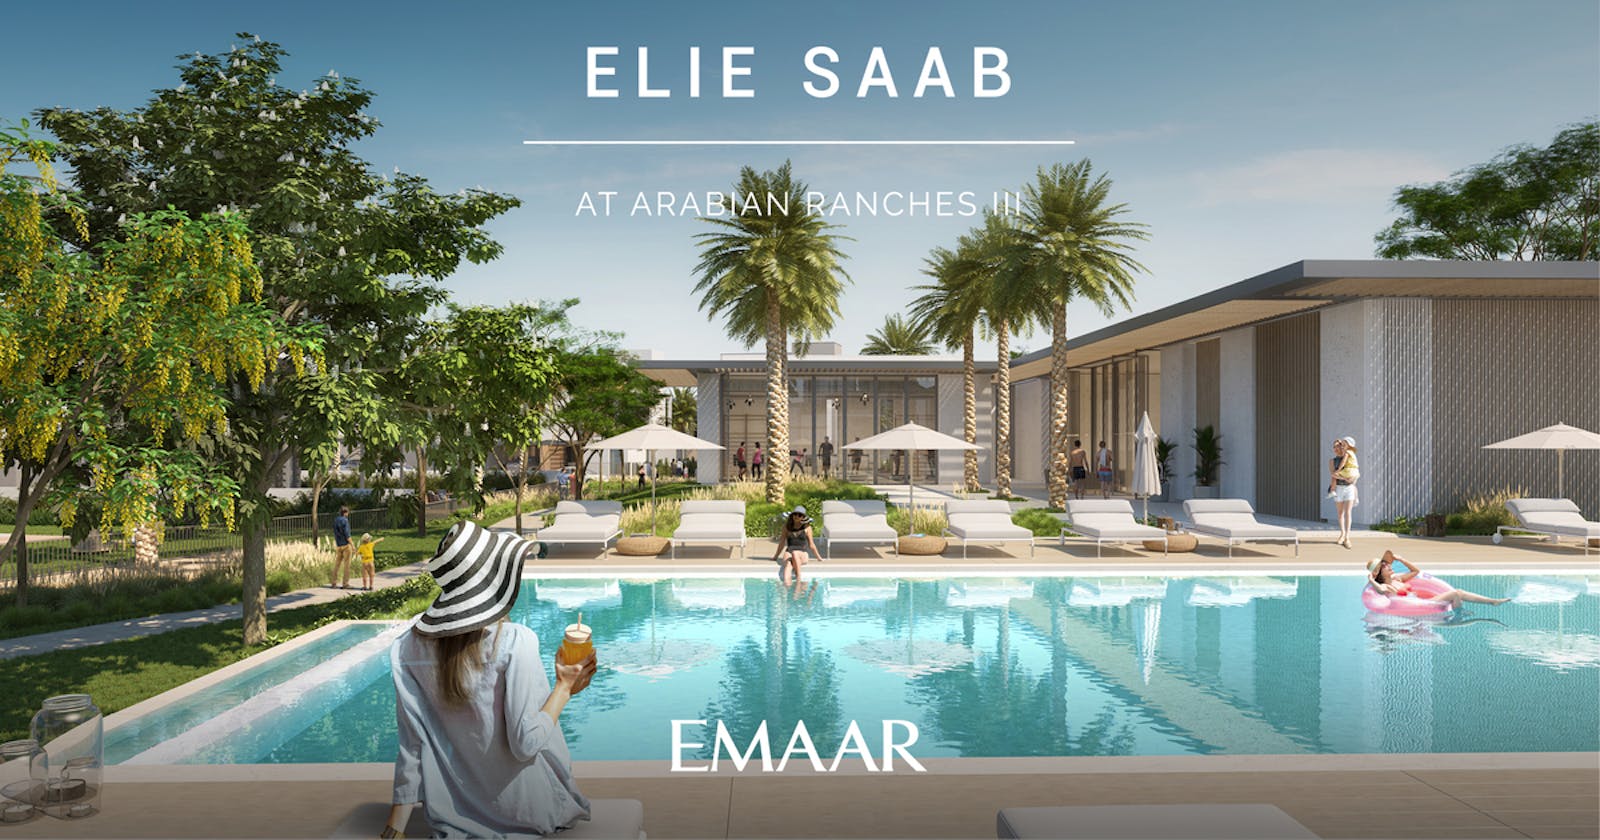 Emaar's Elie Saab Villas Offer a Unforgettable Experience at Arabian Ranches 3